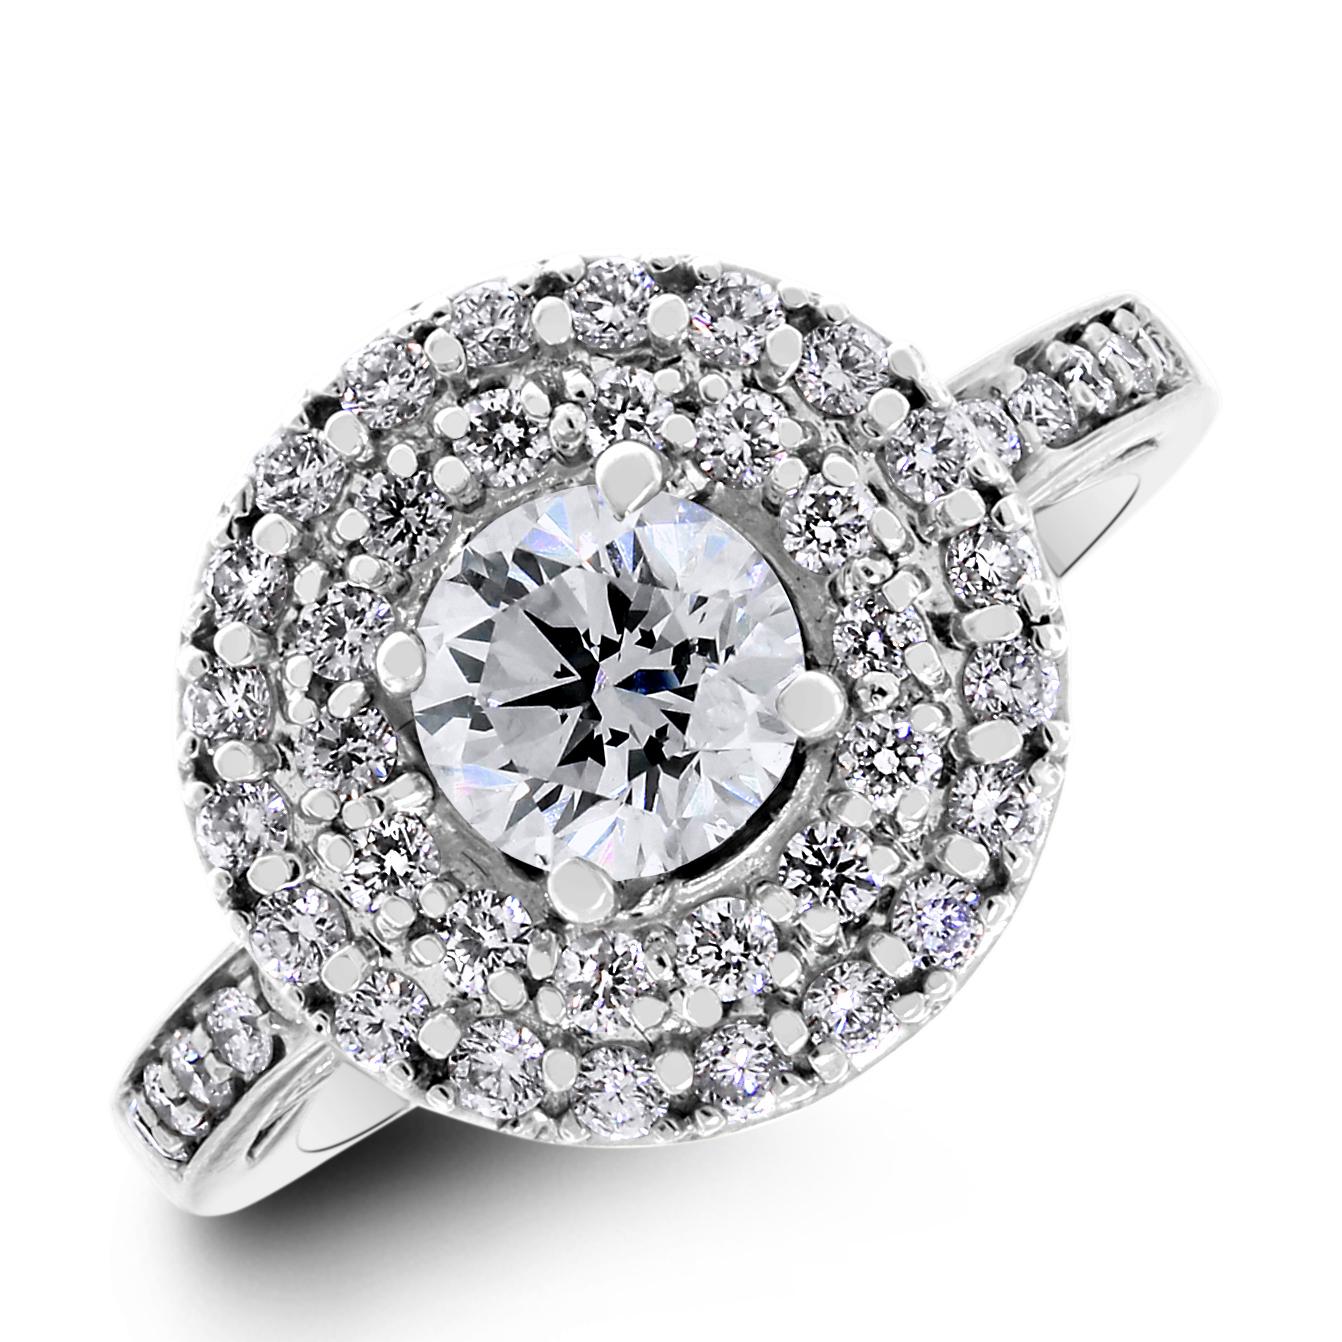 Let her know that she is the center of your world with this unique double halo solitaire diamond engagement ring with accent diamonds on the band as well as the underside of the halo.

Center Diamond Shape: Round
Center Diamond Weight: 0.80 ct